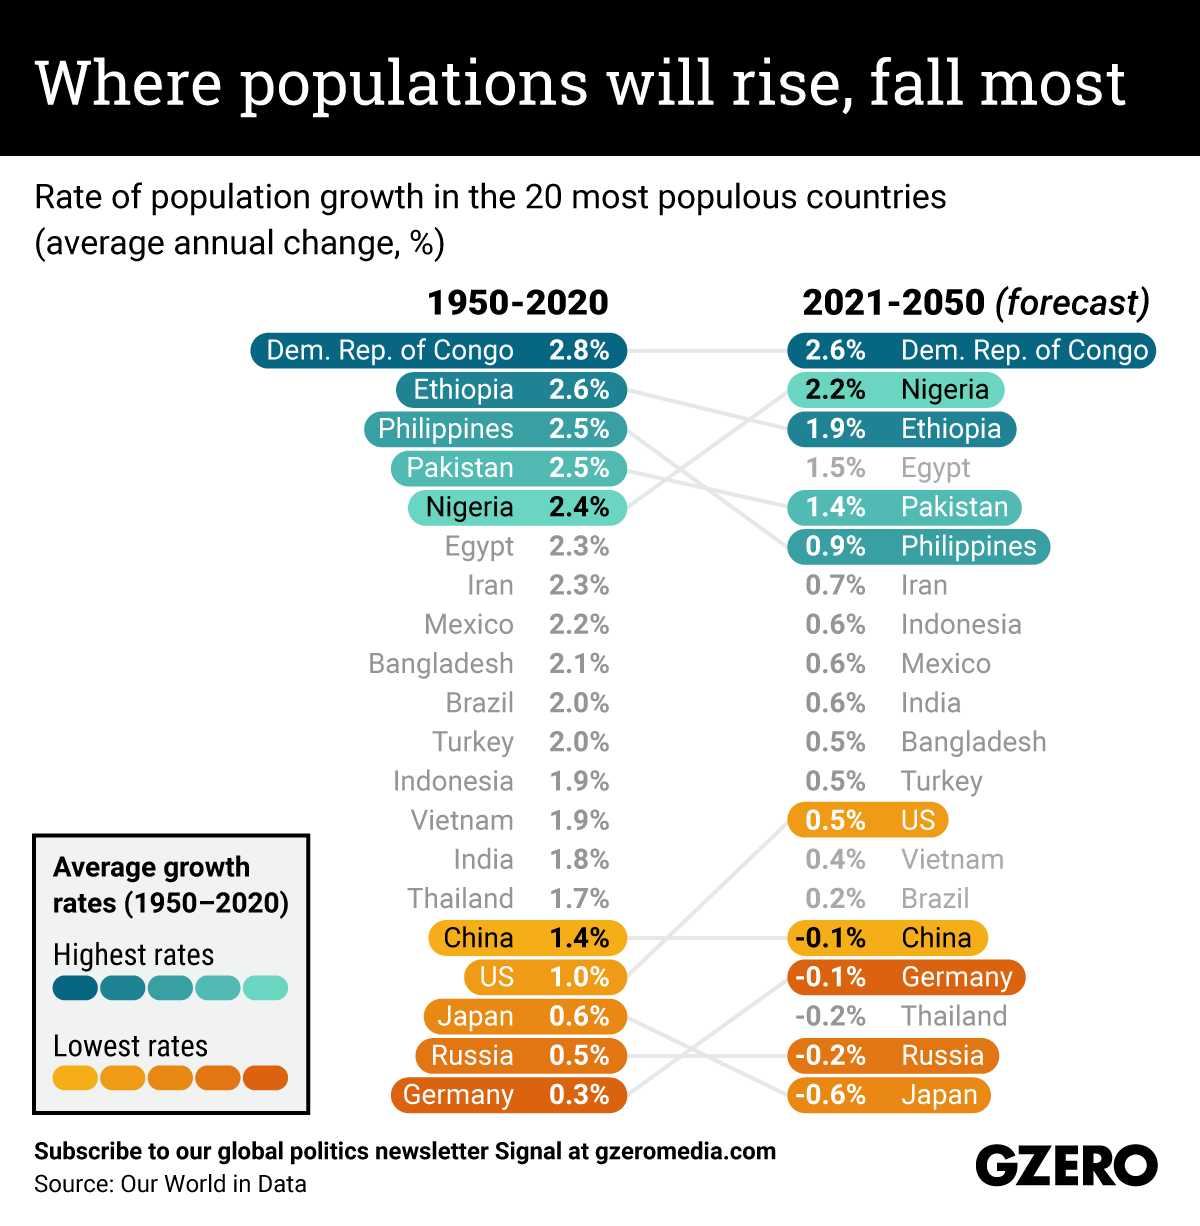 The Graphic Truth: Where populations will rise, fall most